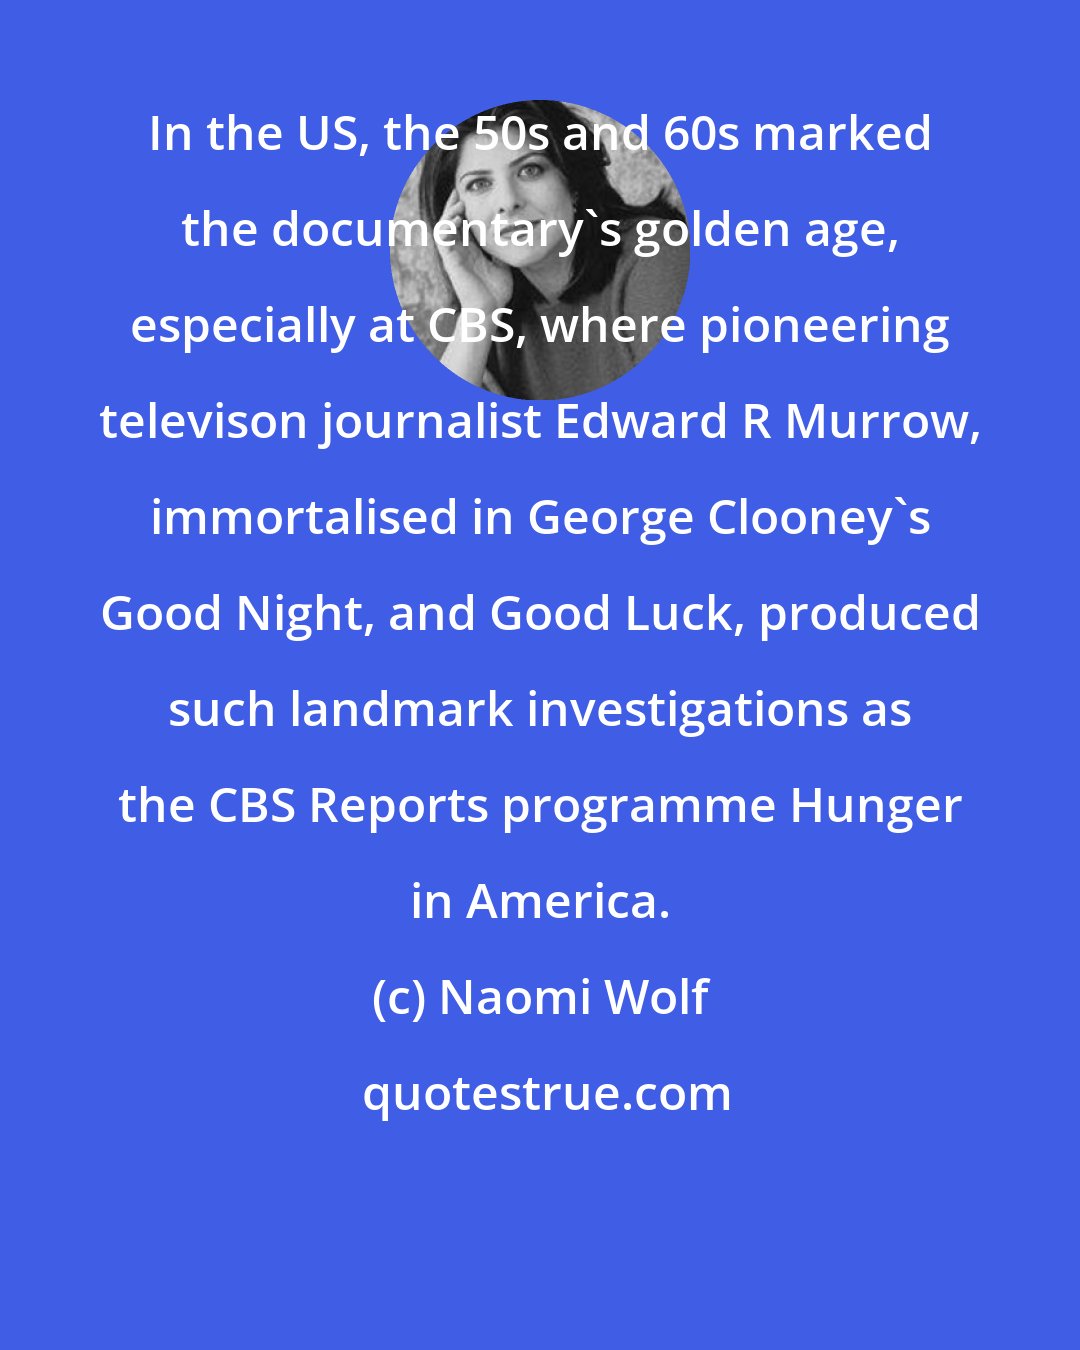 Naomi Wolf: In the US, the 50s and 60s marked the documentary's golden age, especially at CBS, where pioneering televison journalist Edward R Murrow, immortalised in George Clooney's Good Night, and Good Luck, produced such landmark investigations as the CBS Reports programme Hunger in America.